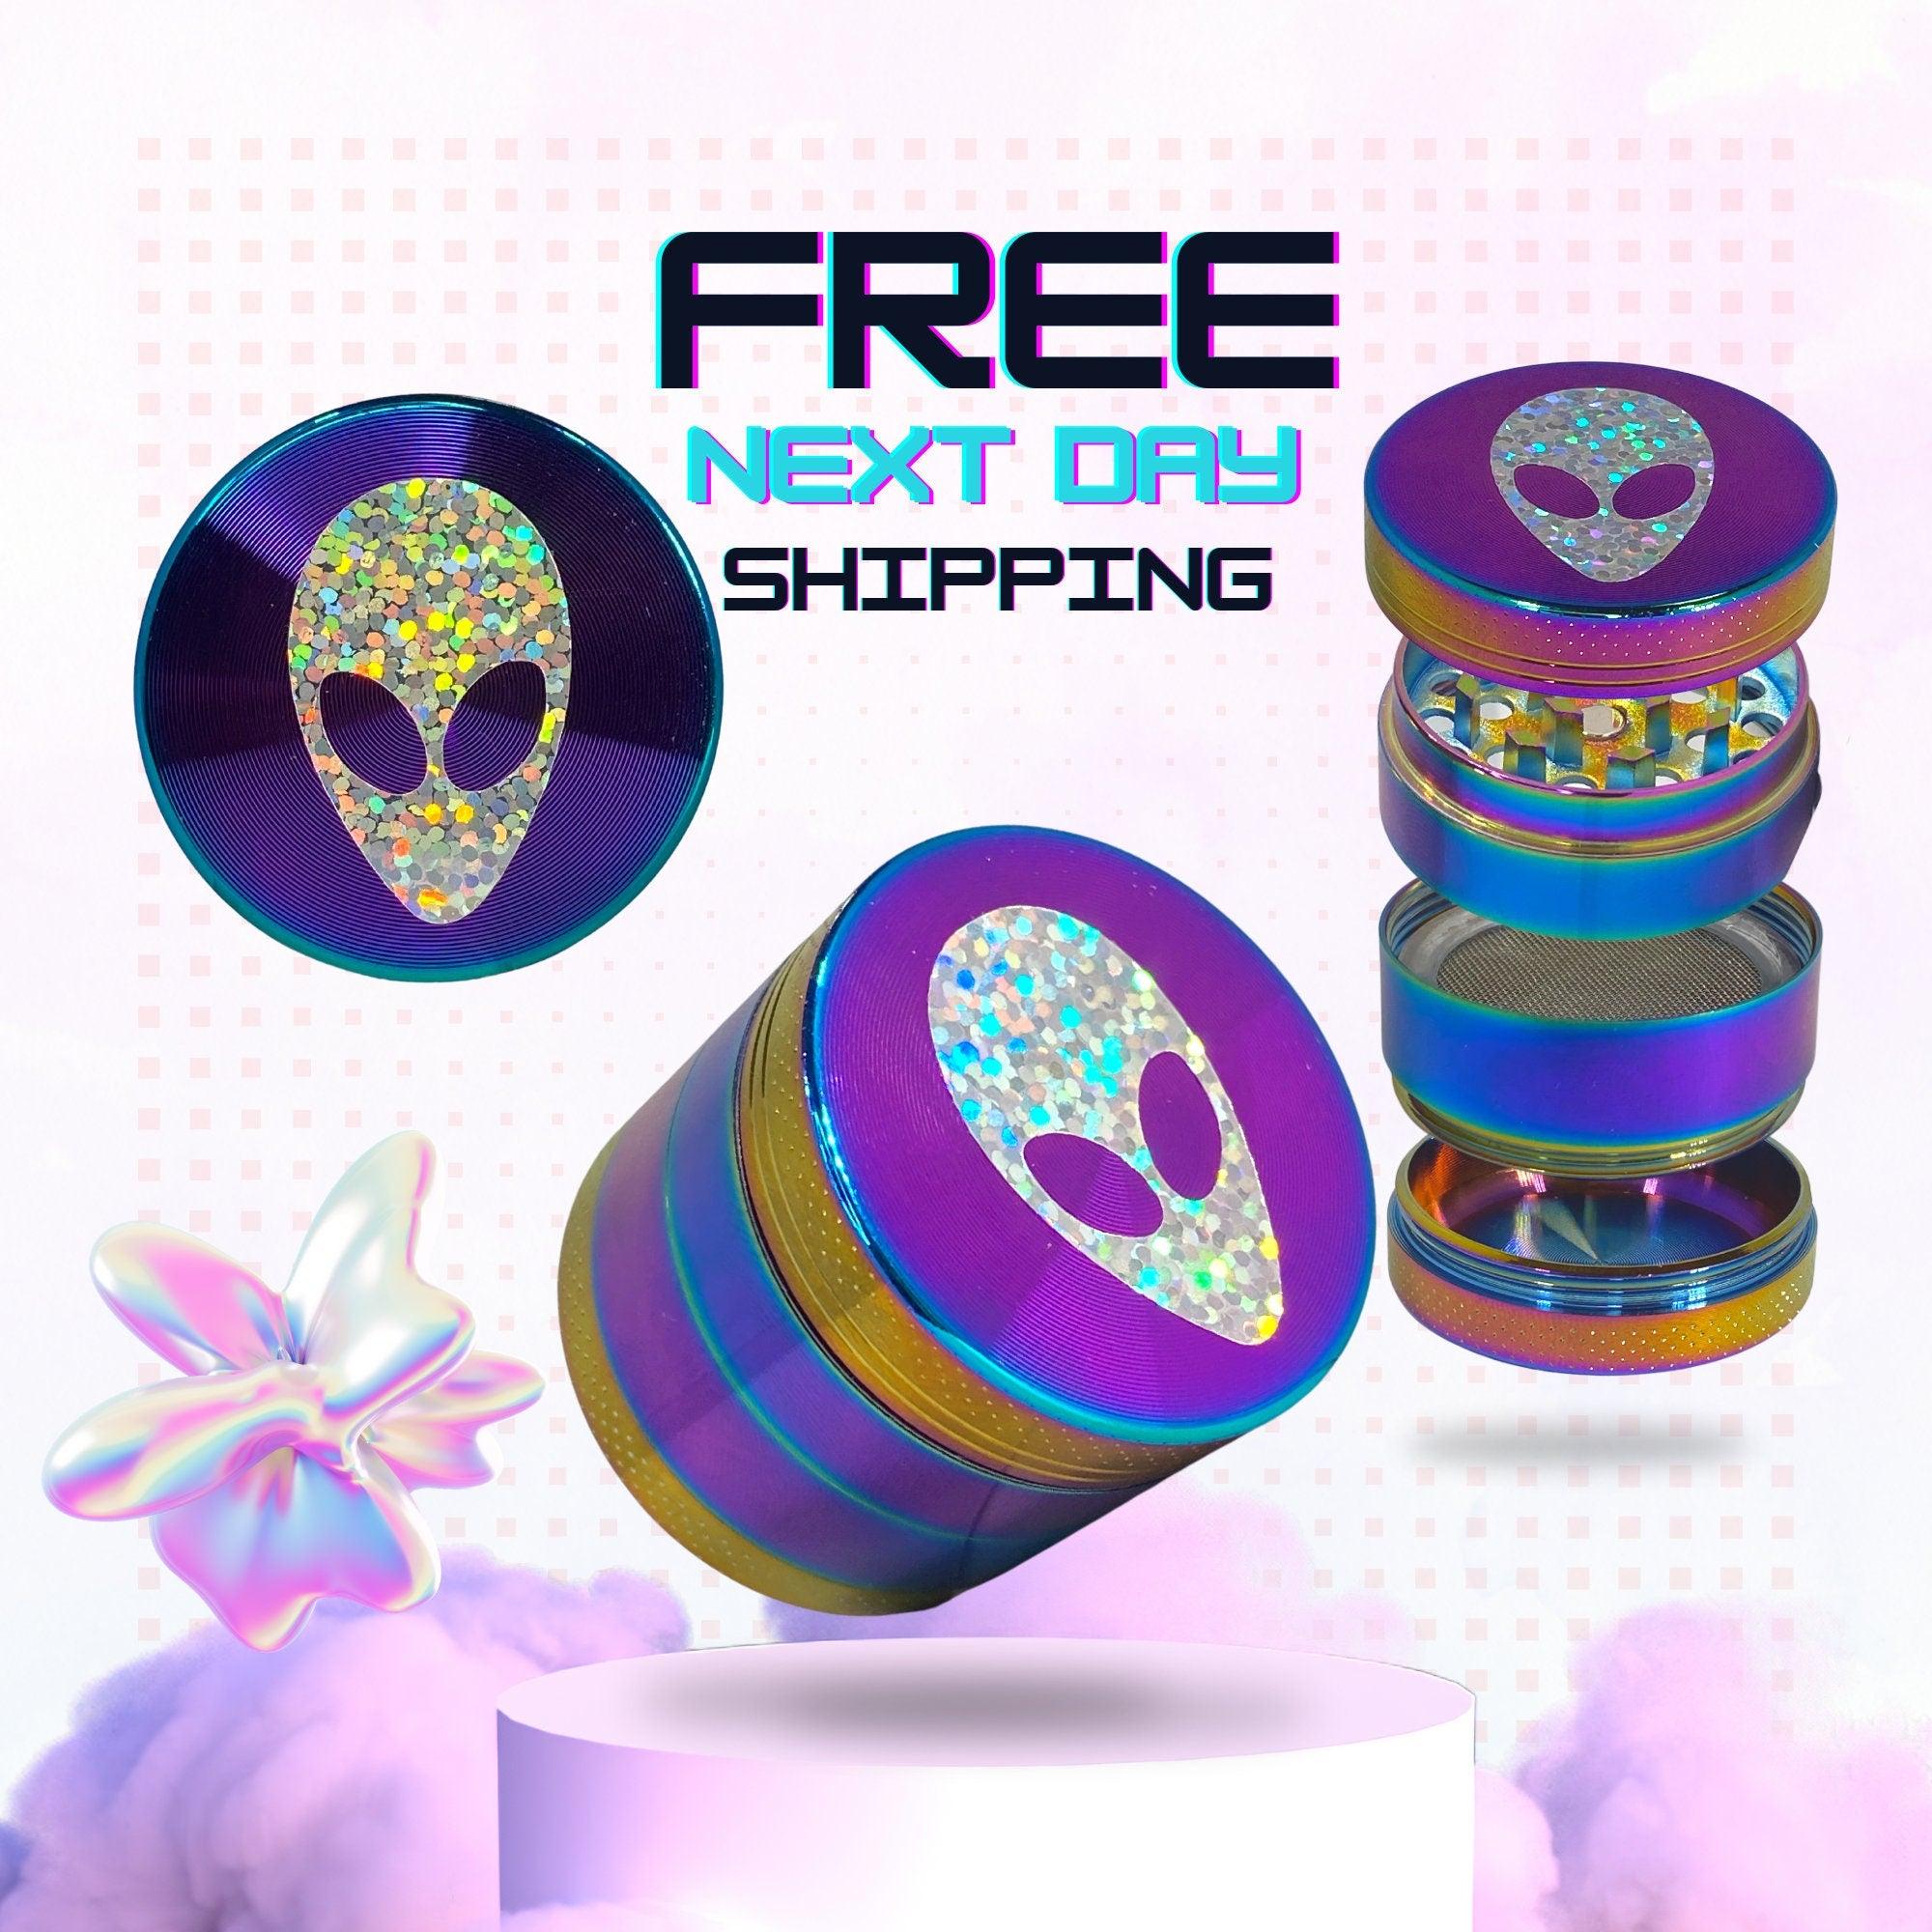 Cute Weed Grinder: iridescent grinder UFO Alien space, cannabis grinders, weed accessories, 4 piece, cannabis, Psychedelic Trippy Herb Girly